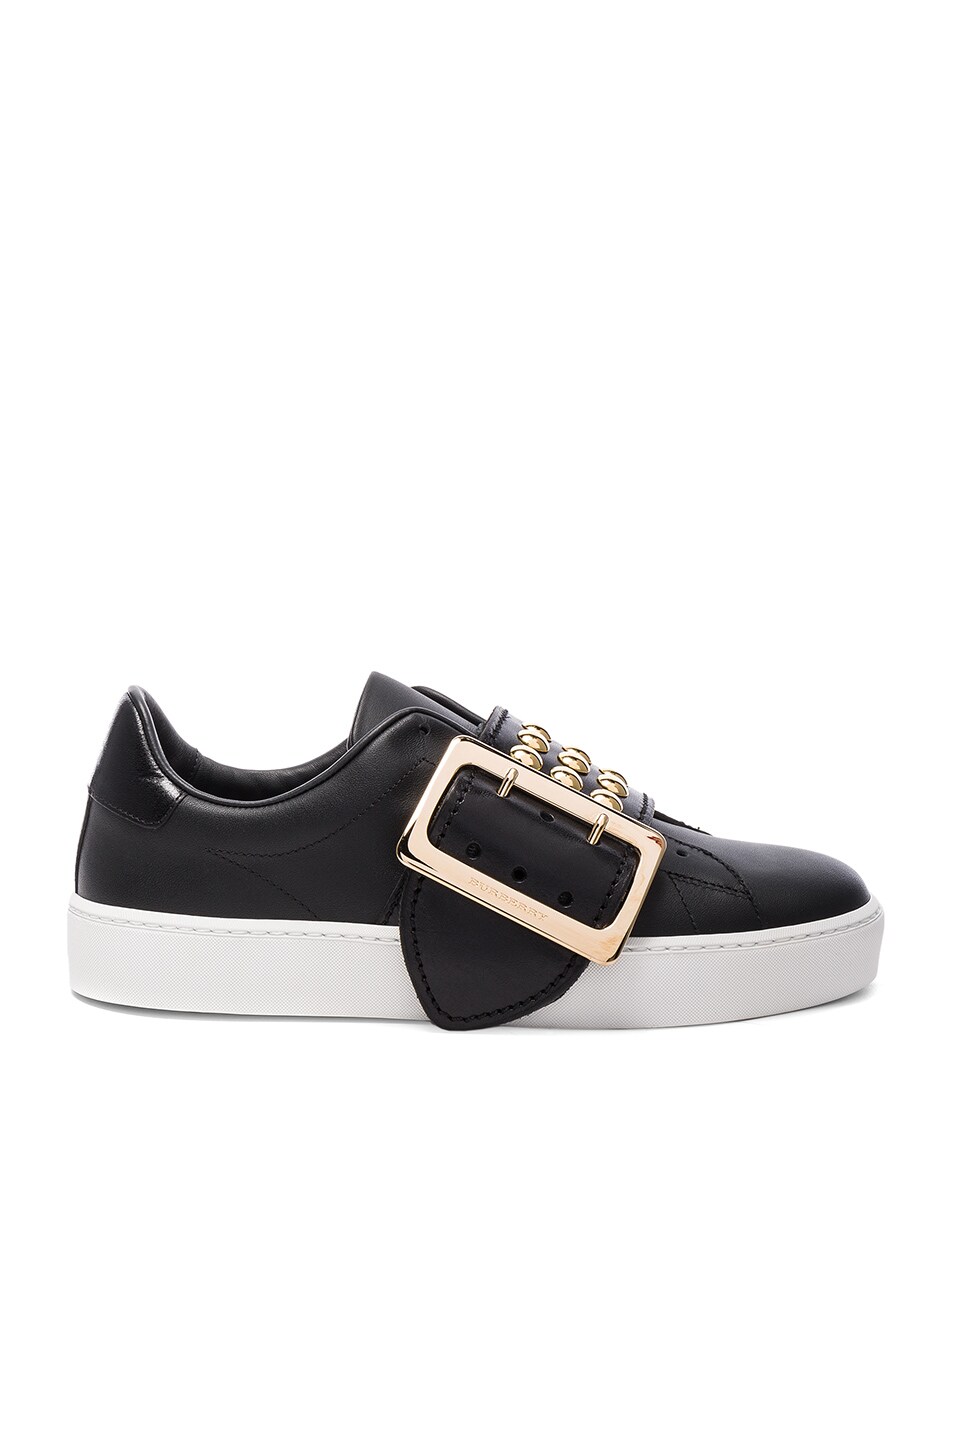 BURBERRY Oversize Buckle And Stud Detail Leather Trainers, Black | ModeSens